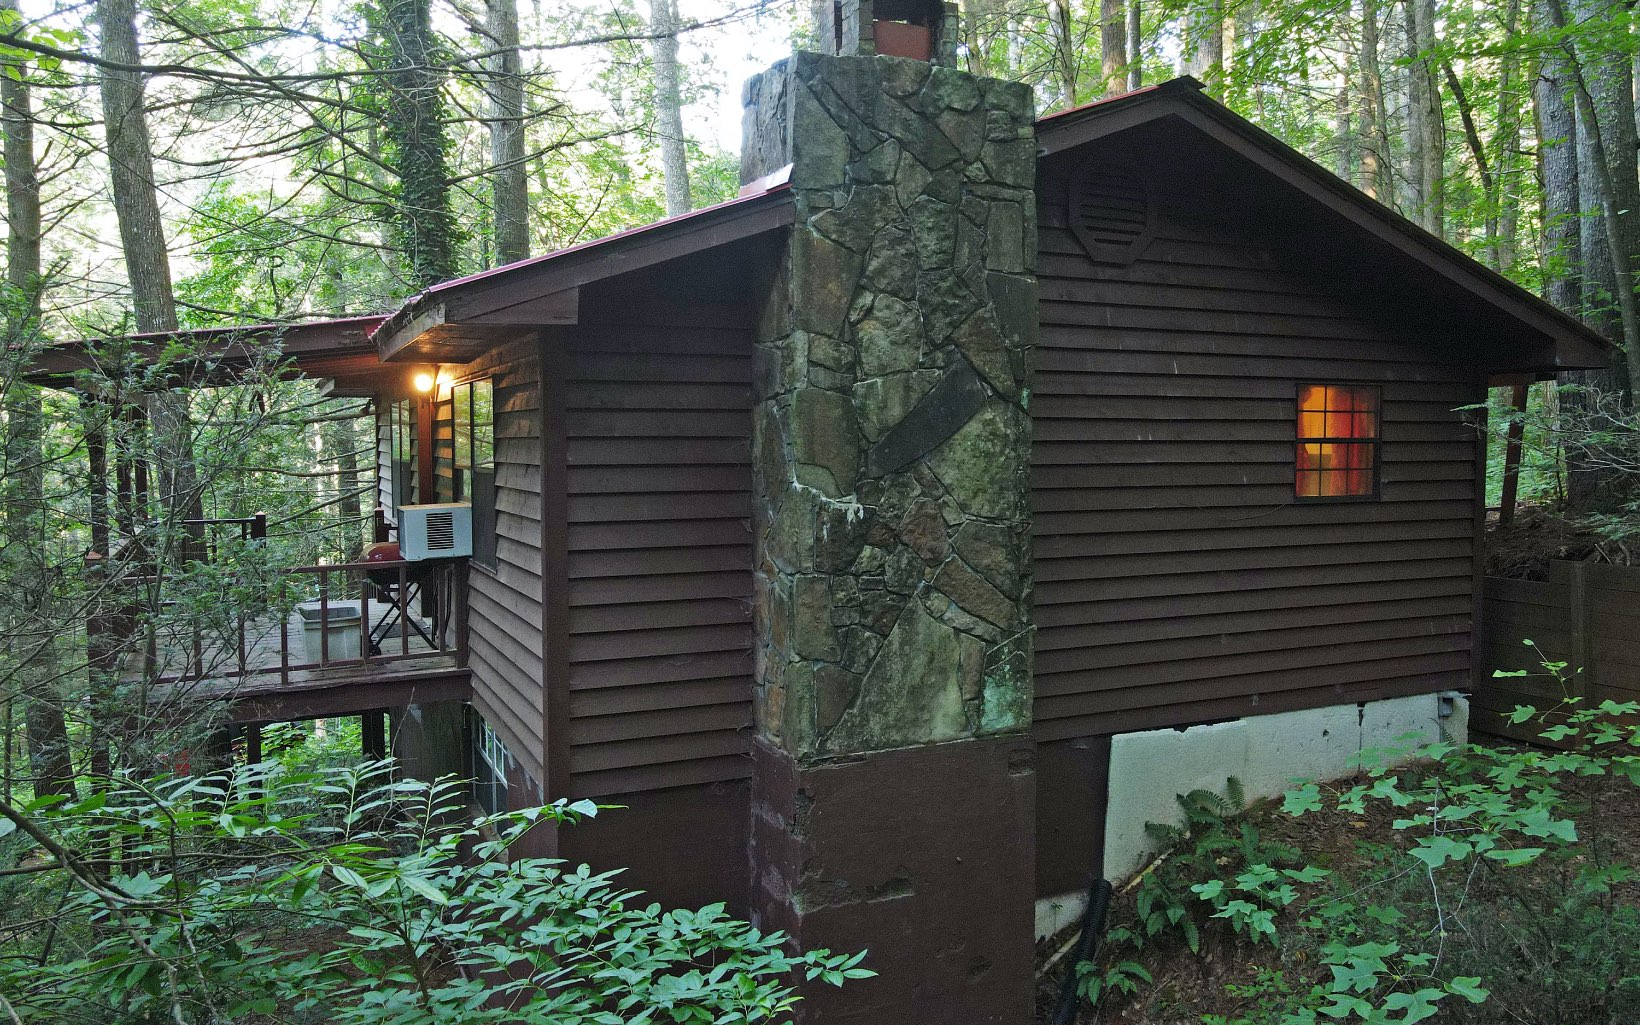 A true mountain cabin in a great location of the North Georgia Mountains. Drive to Vogel State Park or Helton Creek Falls within 3-4 minutes. A community of mountain homes on Blood Mountain surrounded by thousands of acres of National Forest Land. This two bedroom cabin sits on a 1.3 acre wooded lot. Very little yard maintenance with the cabin. An area where home owners are buying and remodeling to make beautiful homes. Perfect for an VRBO or weekend retreat. Needs some work but would be a fantastic place with the right work and style.